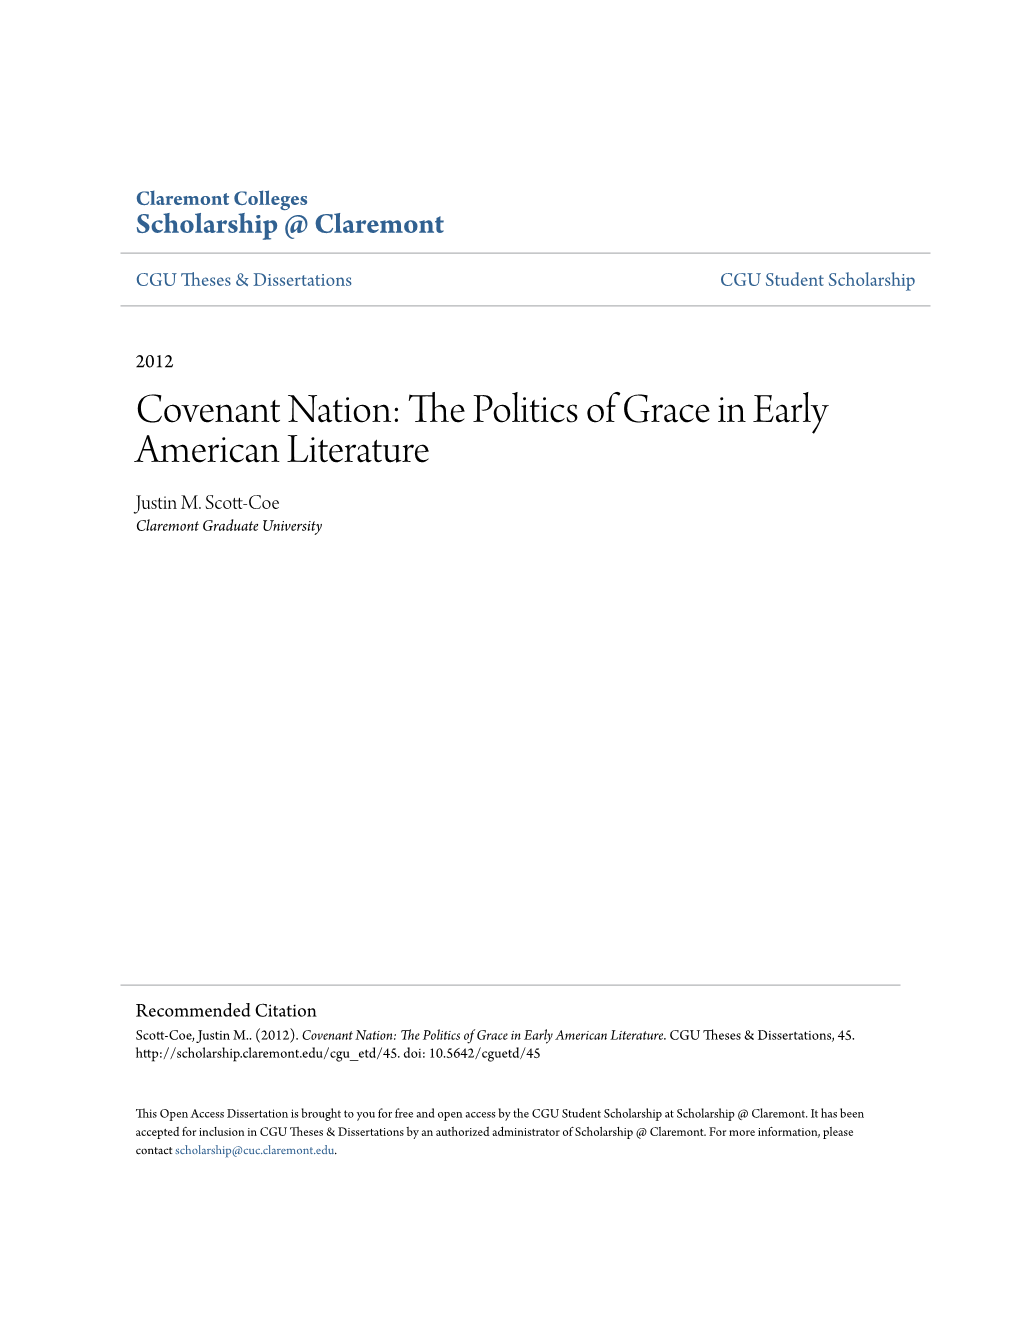 Covenant Nation: the Politics of Grace in Early American Literature